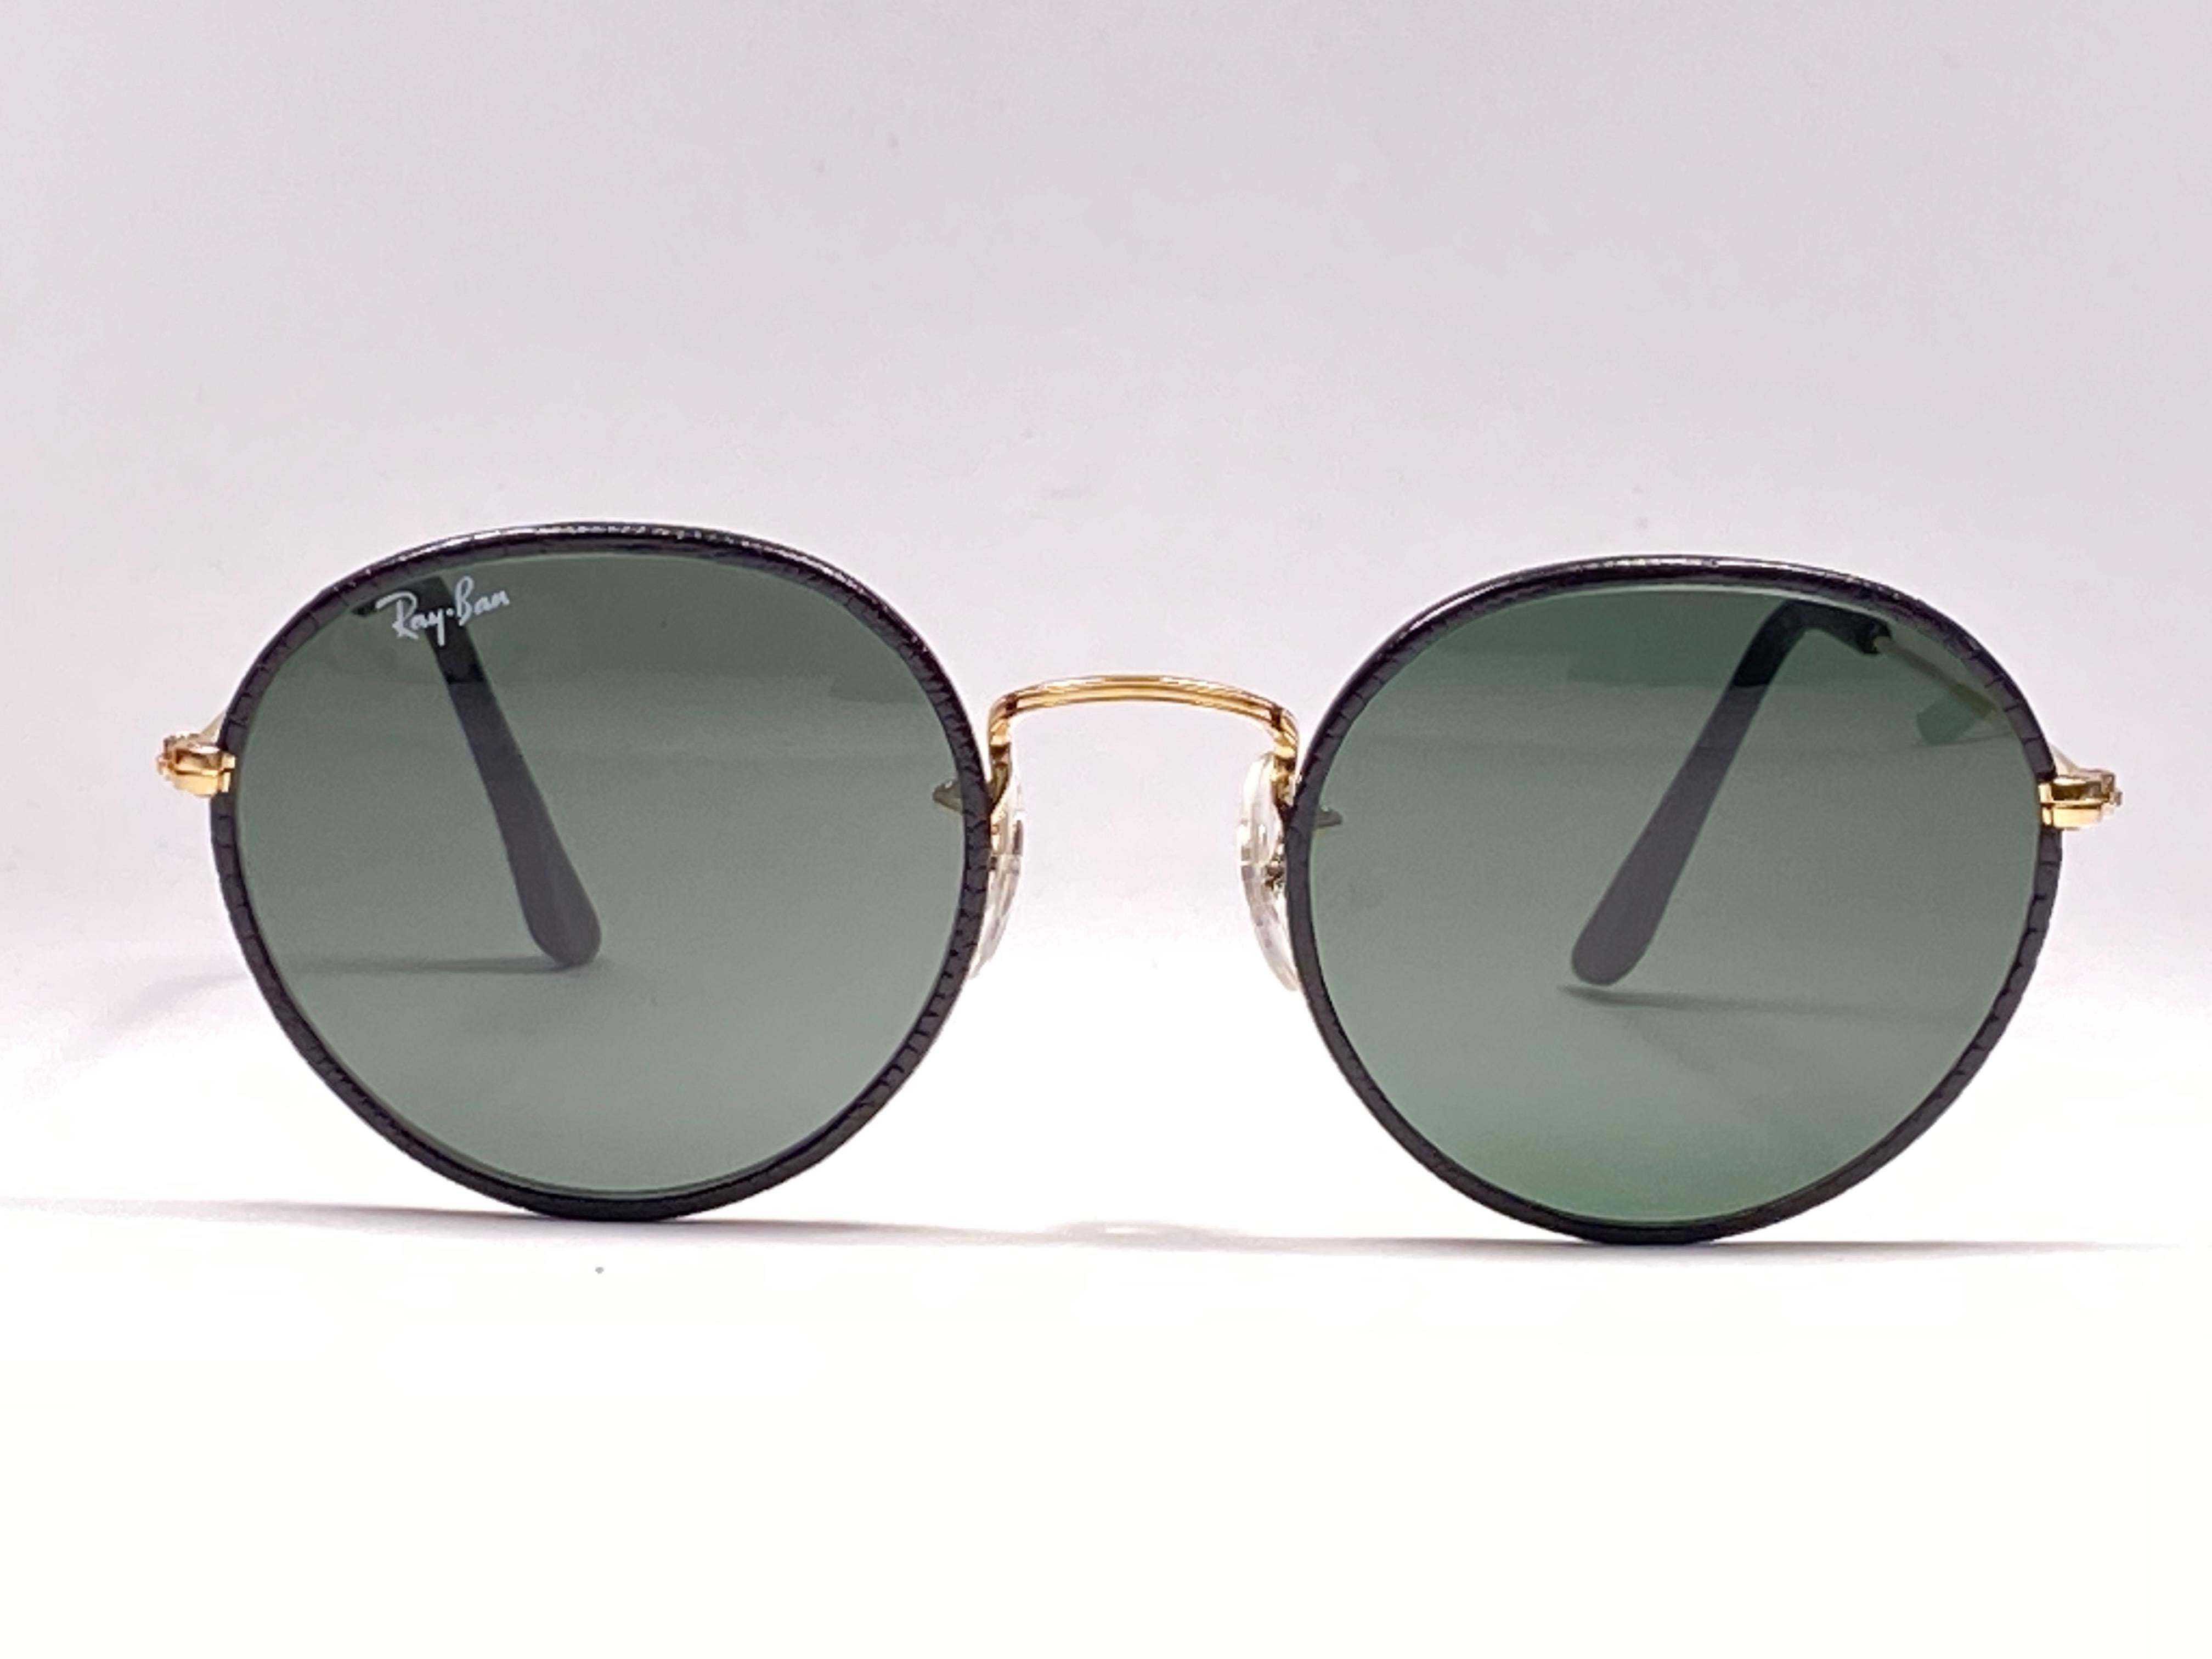 Mint Vintage Ray Ban black leather with gold metal combination frame sporting g15 grey lenses with light / minor scratching.
Comes with its original Ray Ban B&L case with minor sign of wear due to storage.  
Rare and hard to find in this